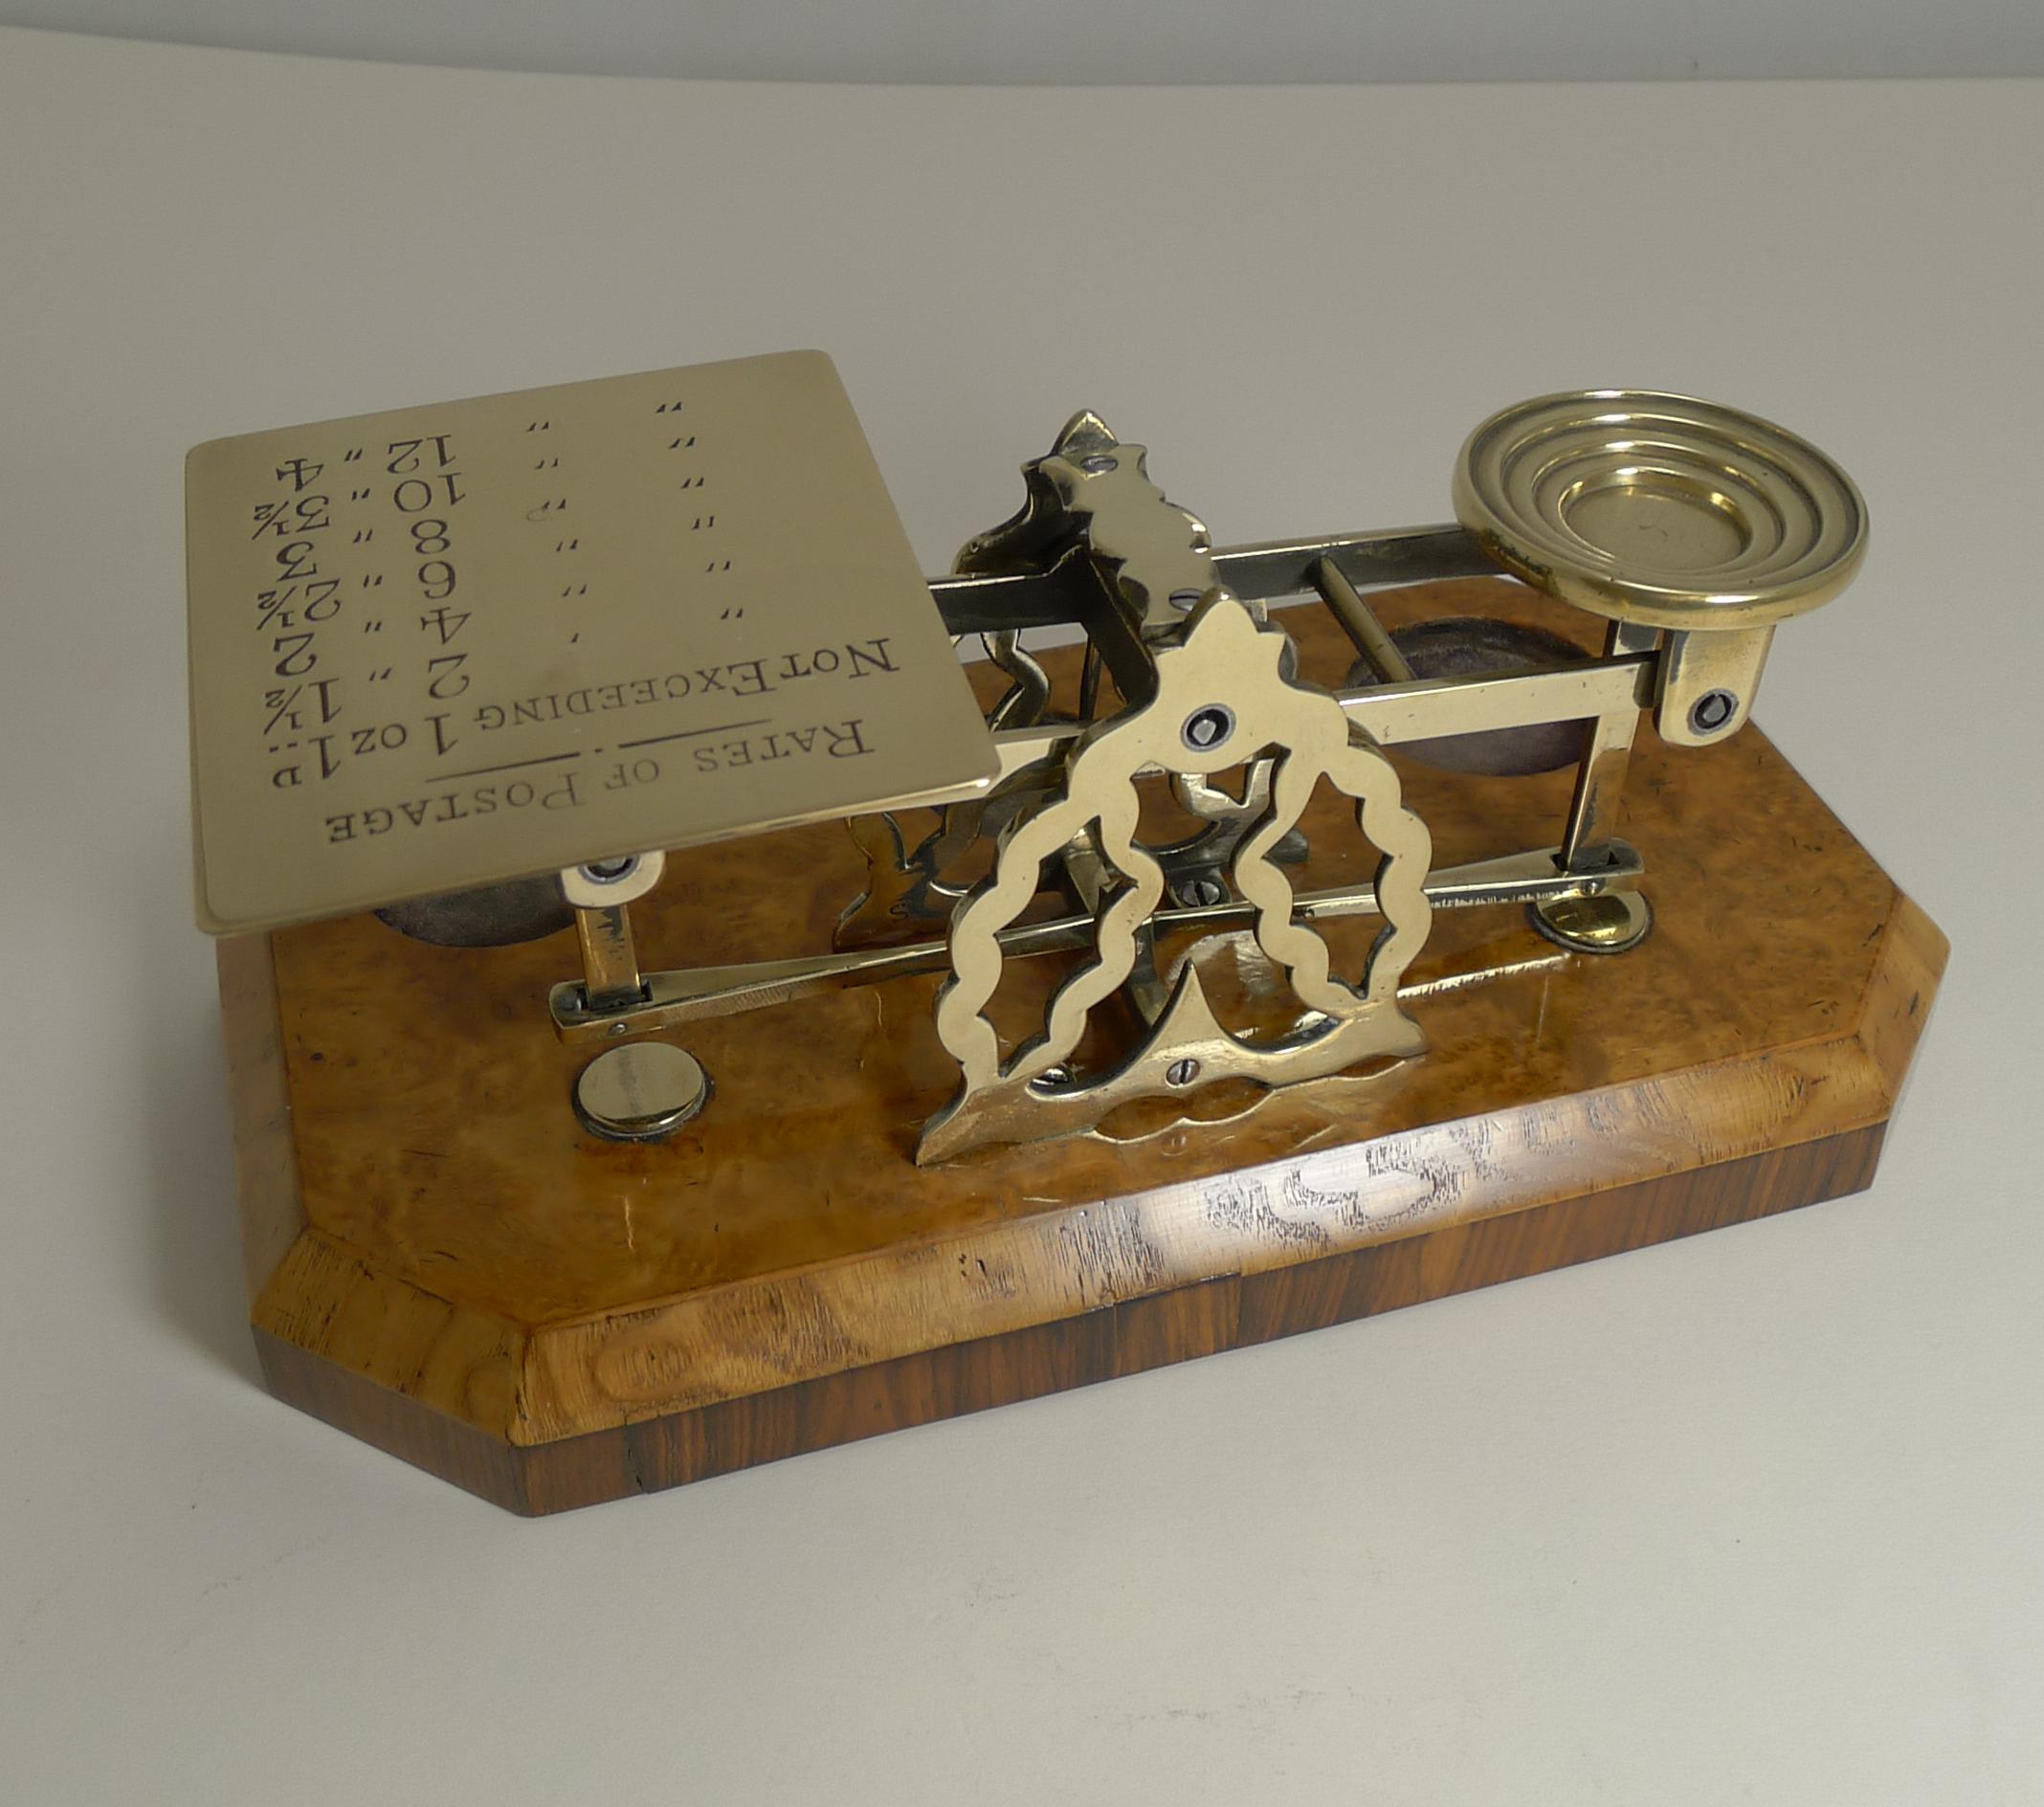 A very fine and unusual example of Victorian postal / letter scale dating to c.1890 and made by the top-notch maker, Sampson Mordan & Co. of London; signed across the balance.

The base is what makes this an unusual example veneered with three